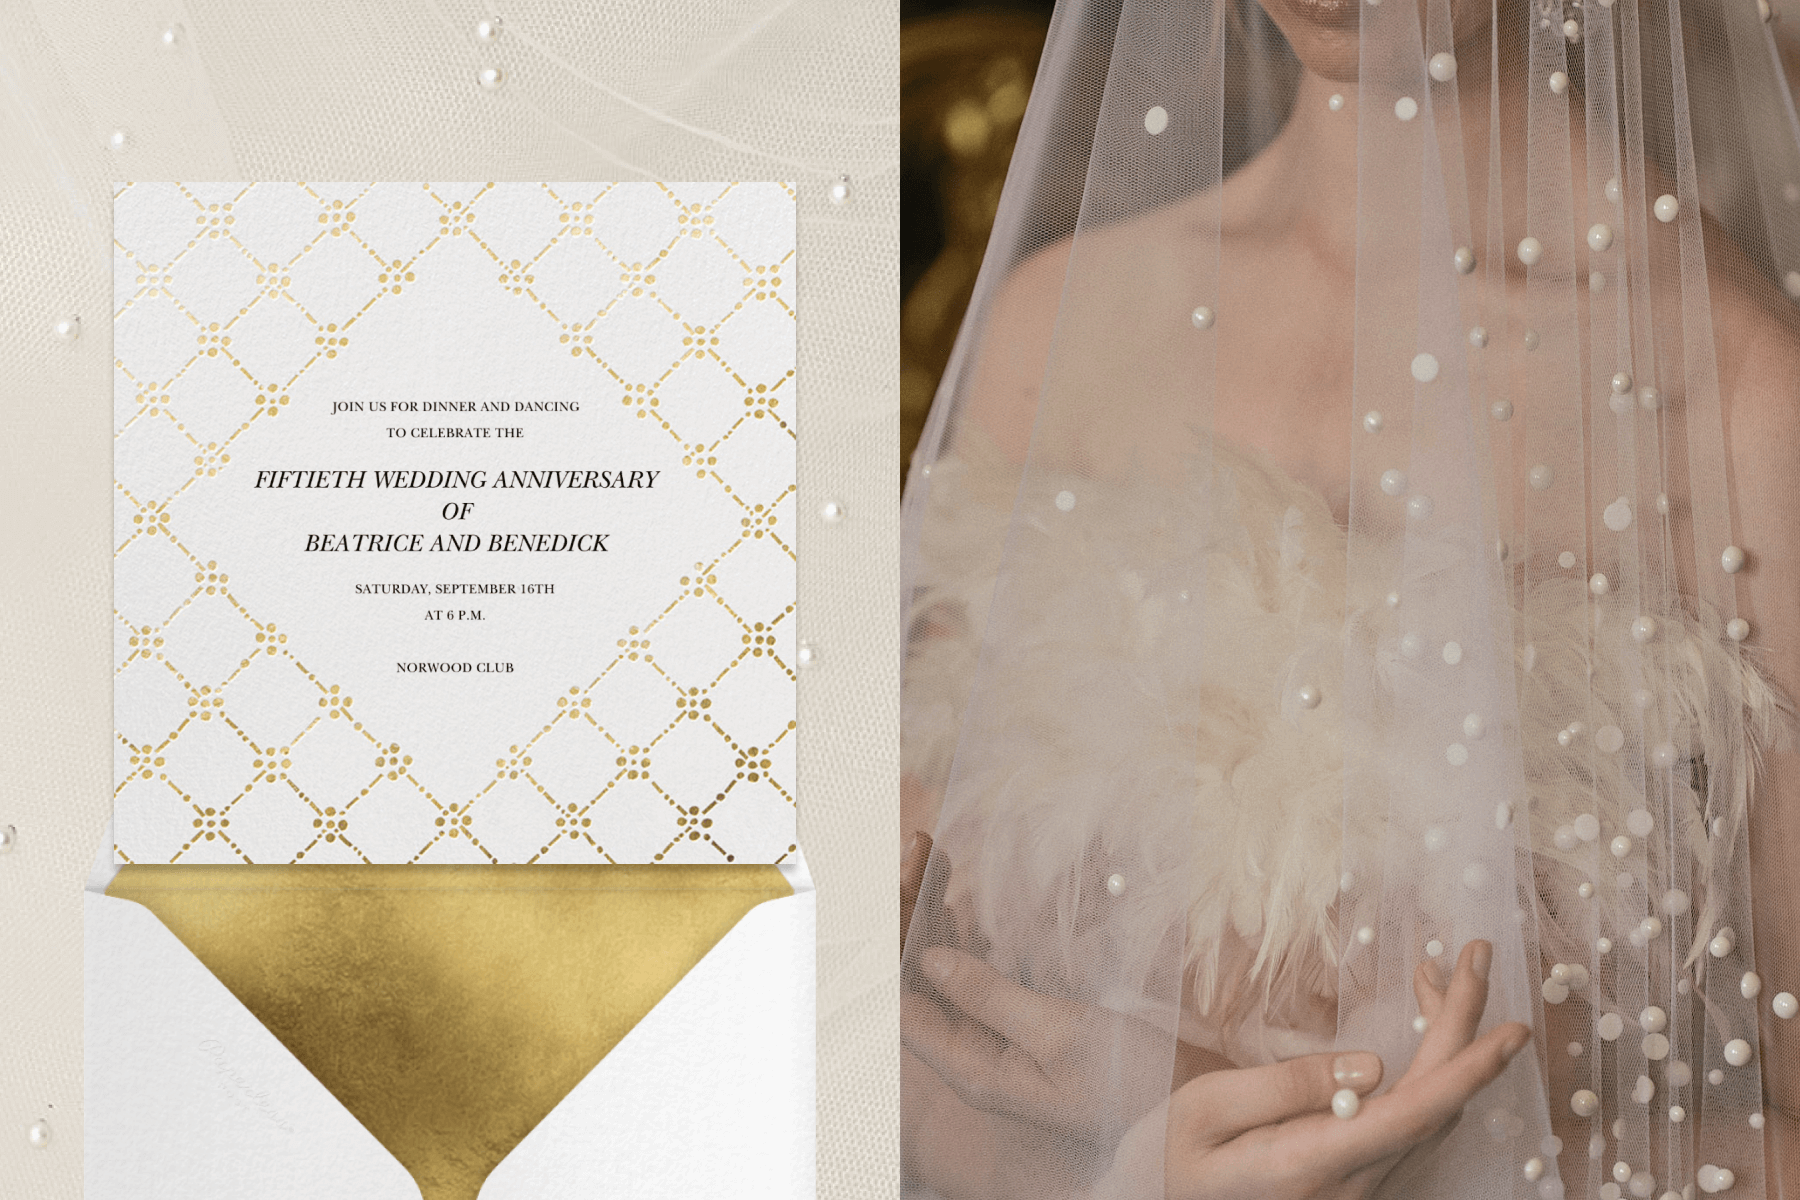 Left: A white wedding invitation with a decorative gold lattice pattern and a white envelope with gold liner. Right: A close-up of a person wearing a white veil with pearl details over a featured bustier.